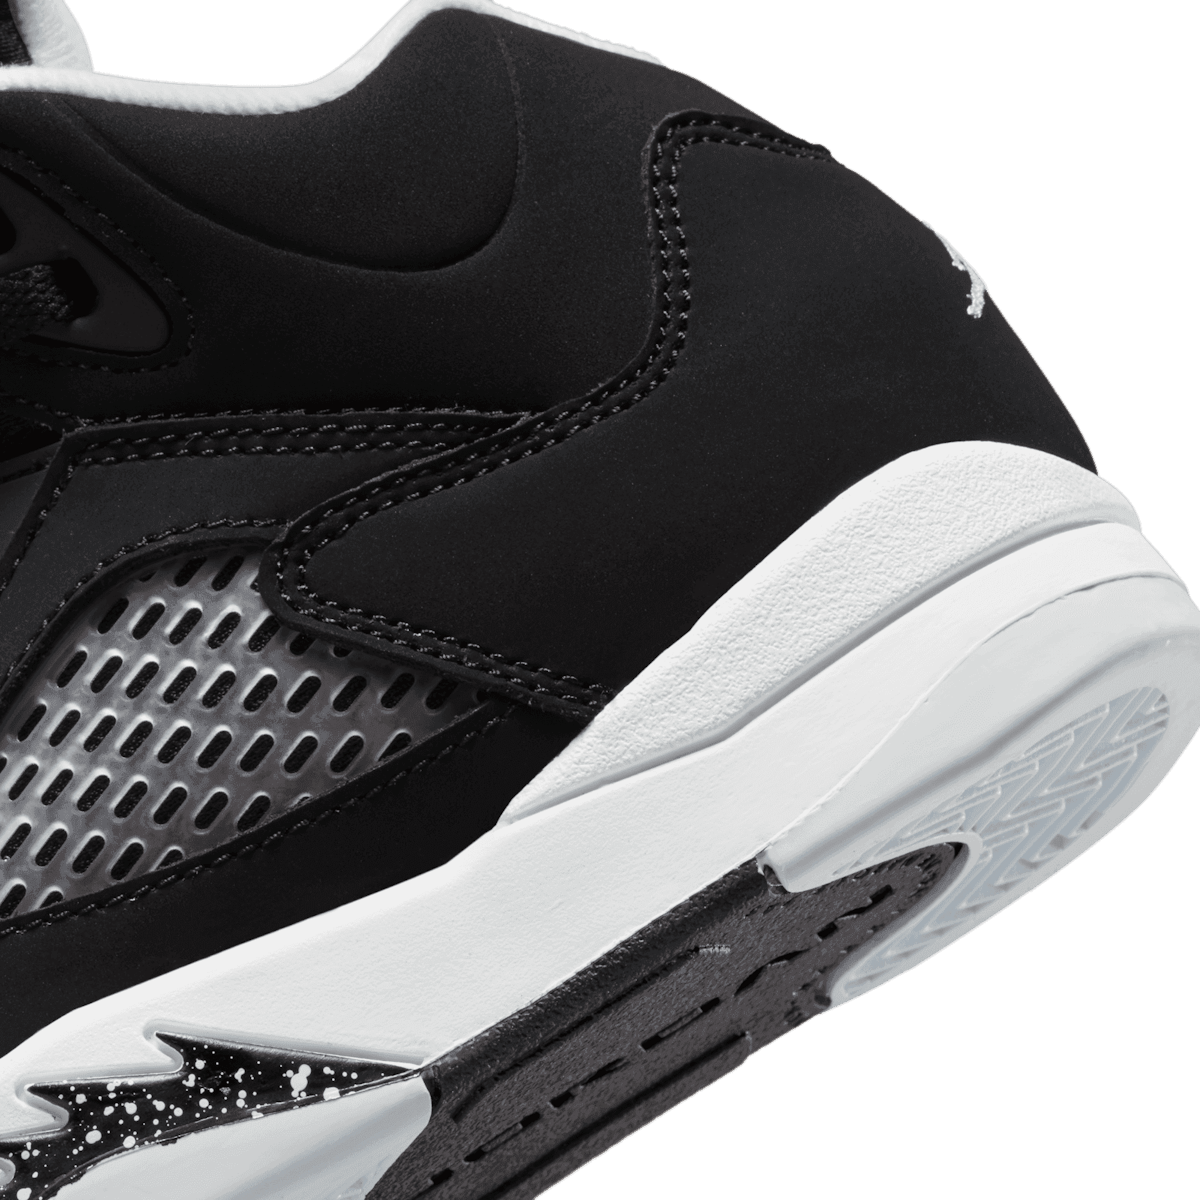 Nike Nike Air Jordan 5 Retro Moonlight  Size 13 Available For Immediate  Sale At Sotheby's